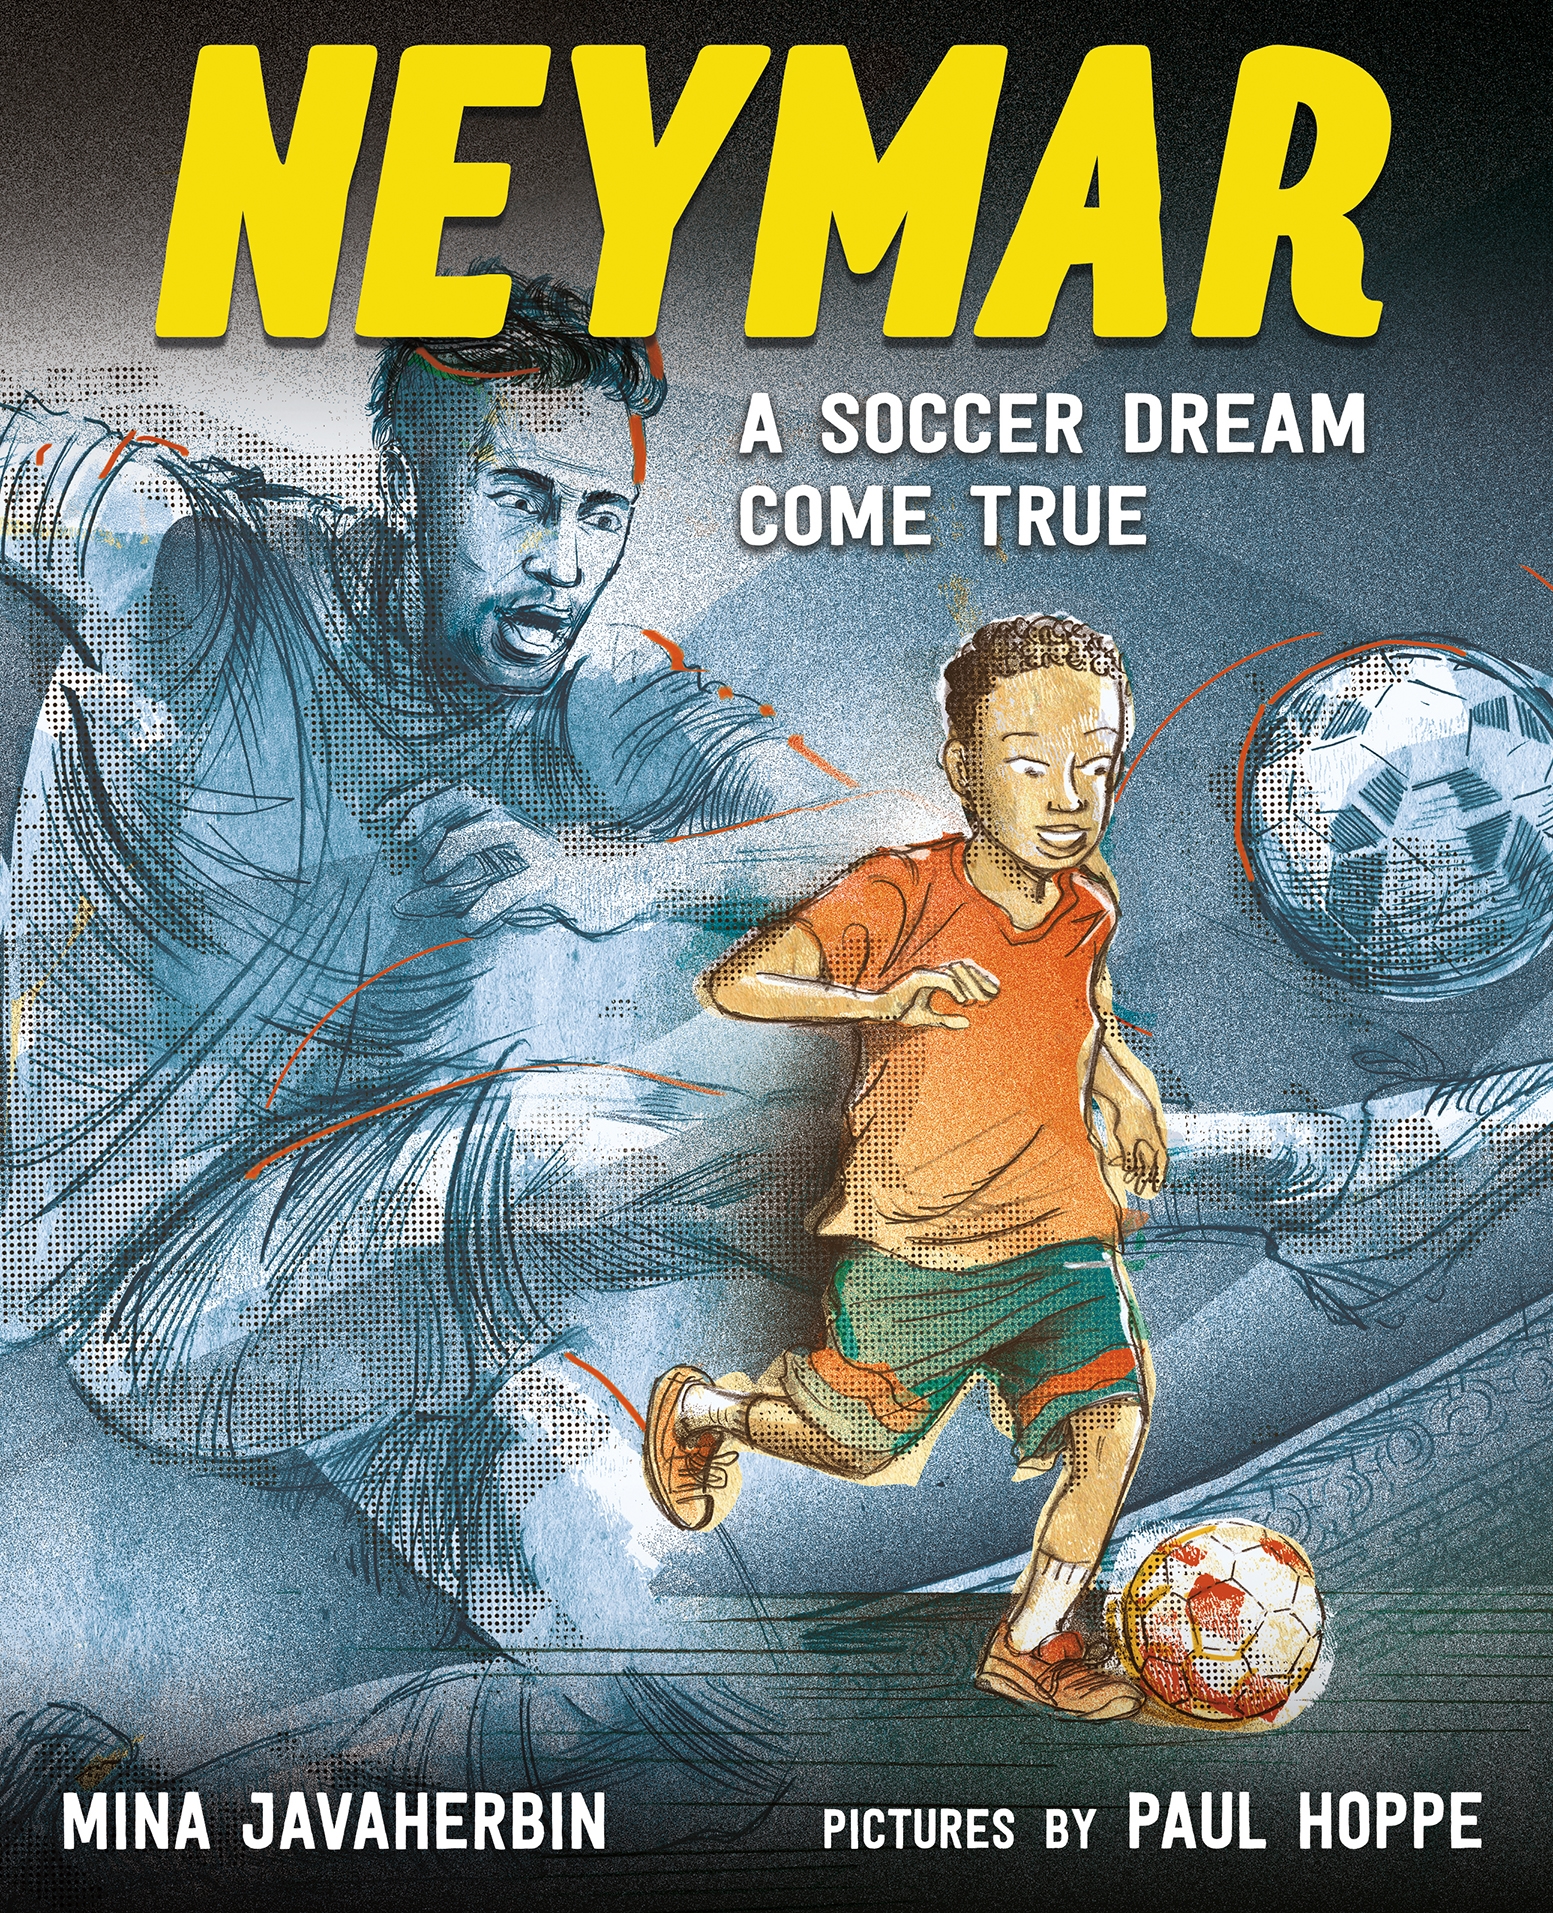 Sunday Story Time with Paul Hoppe (Illustrator of Neymar: A Soccer Dream Come True)